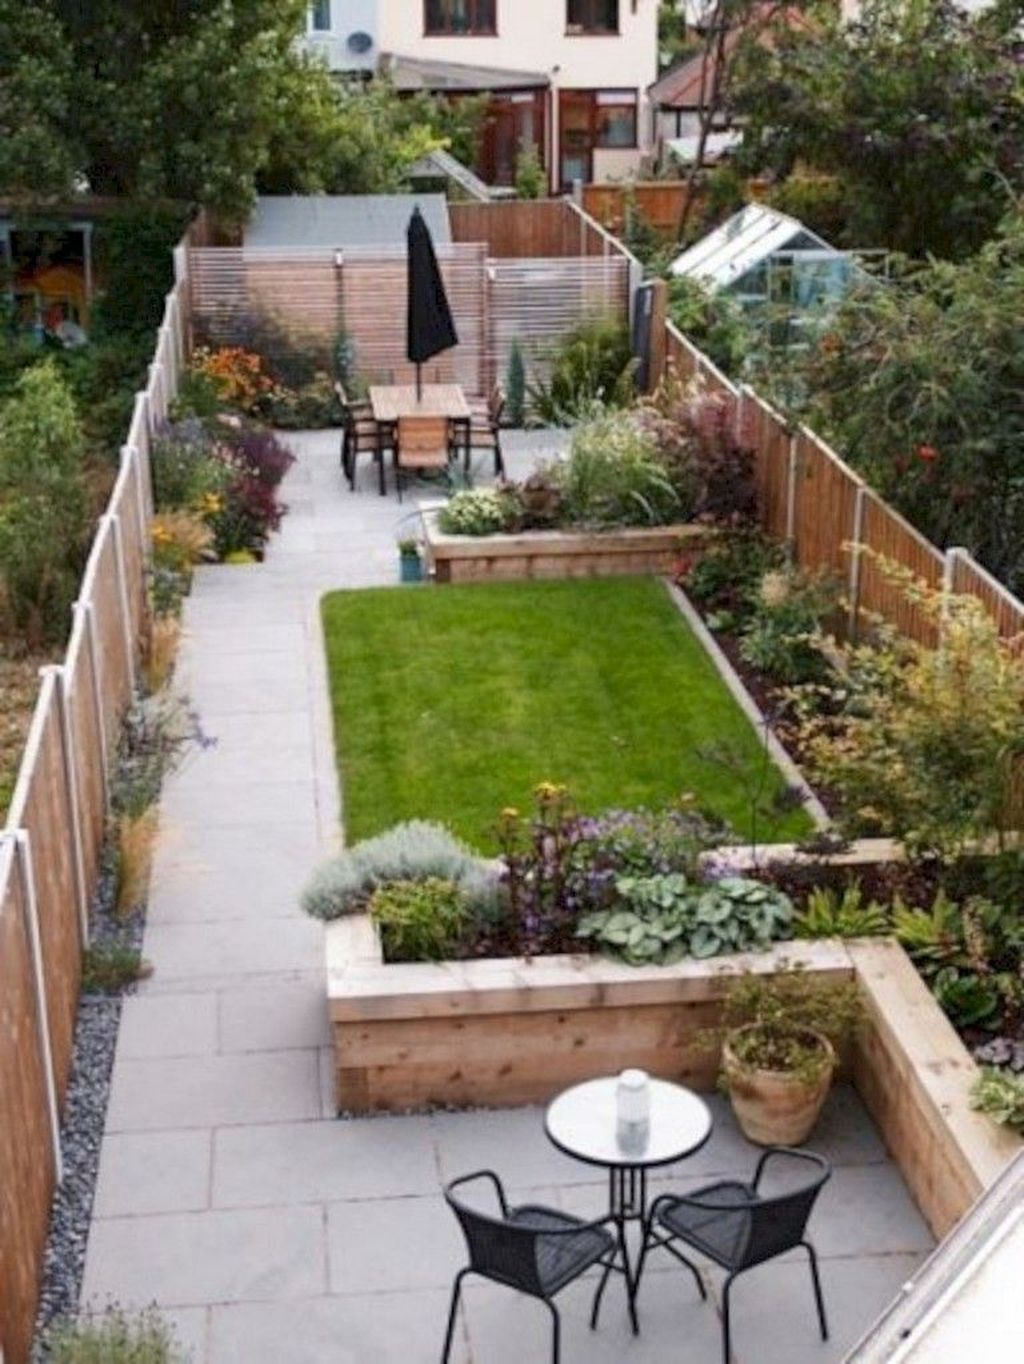 Amazing Garden Design Ideas For Small Space To Try 25